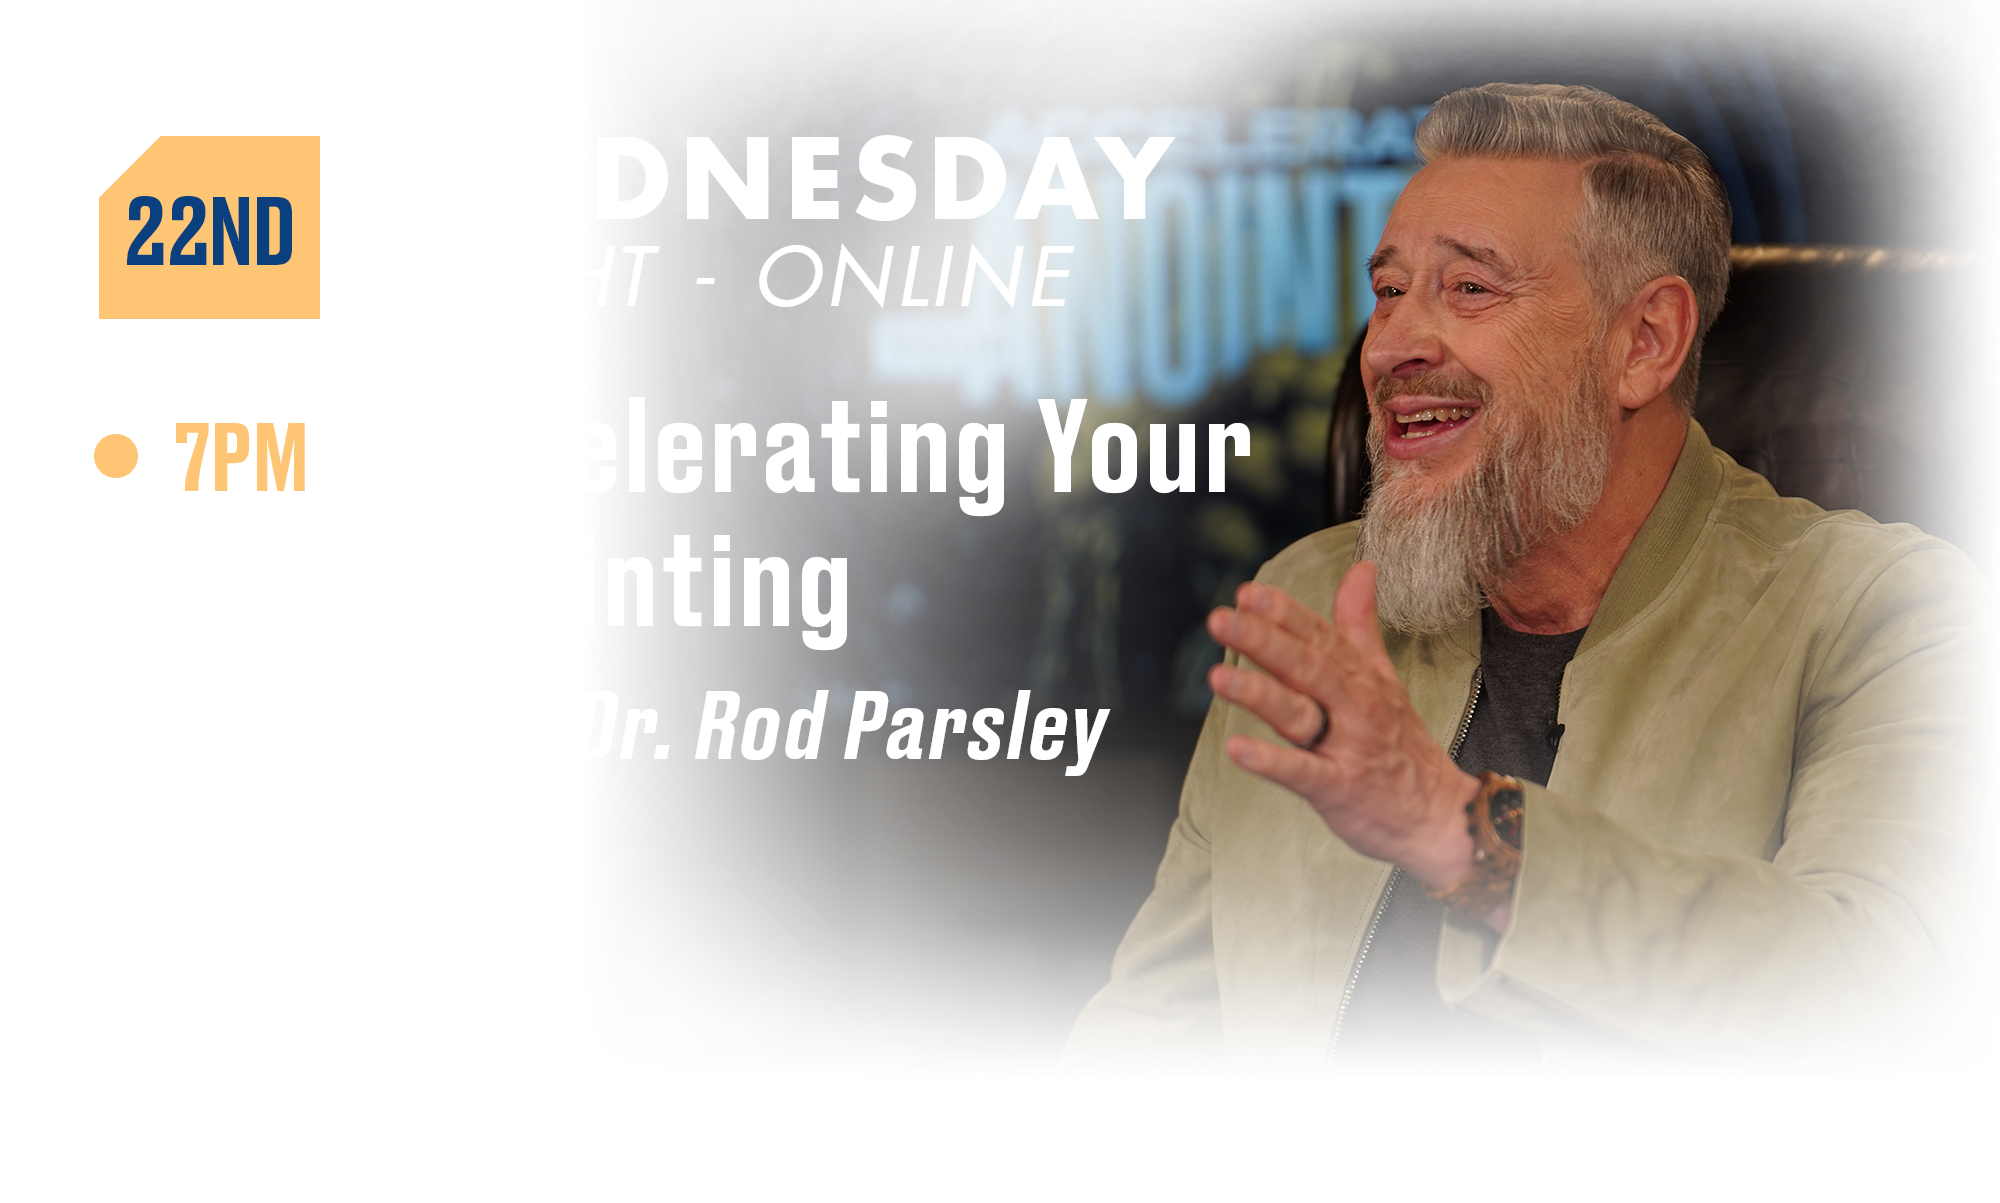 22nd Wednesday Night - Online Accelerating Your Anointing with Dr. Rod Parsley